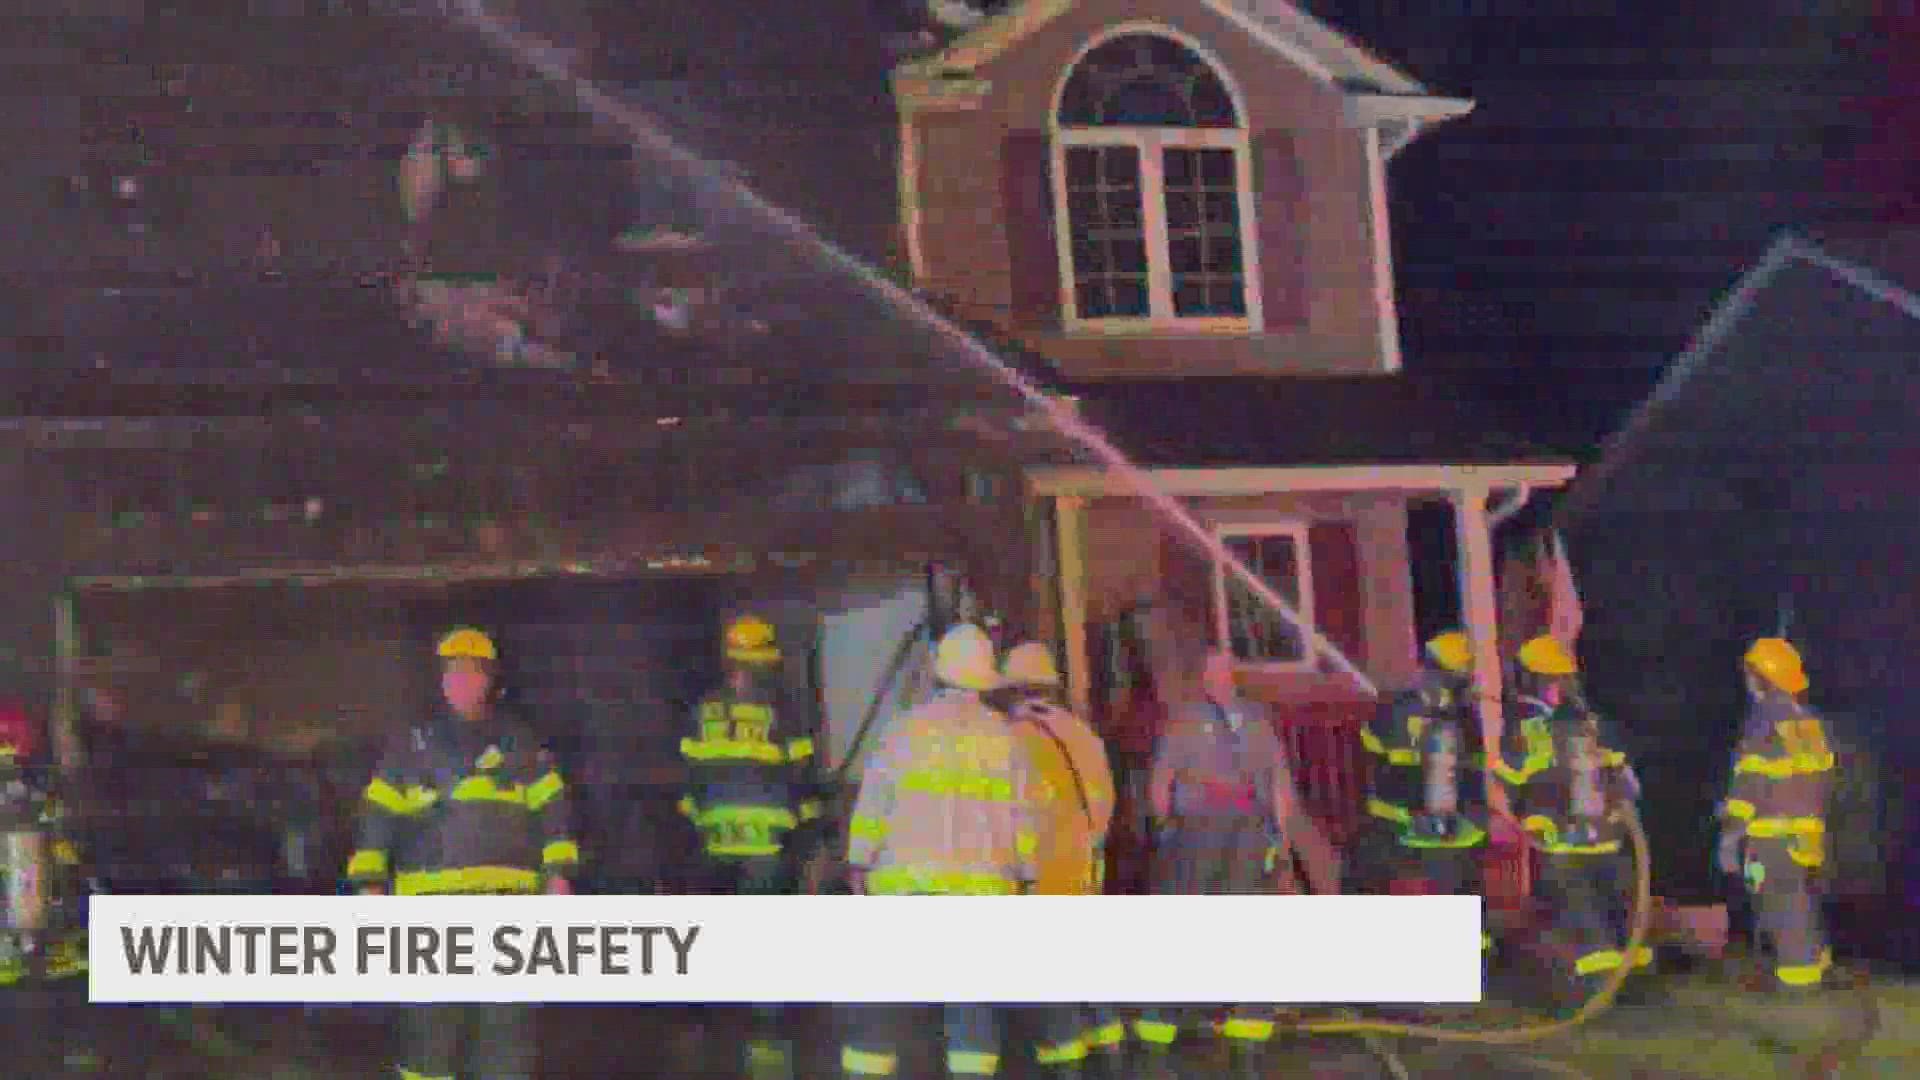 House fires are keeping metro crews busy lately.
As the weather turns cold, and the risks go up, here's what first responders recommend to keep Iowans safe.